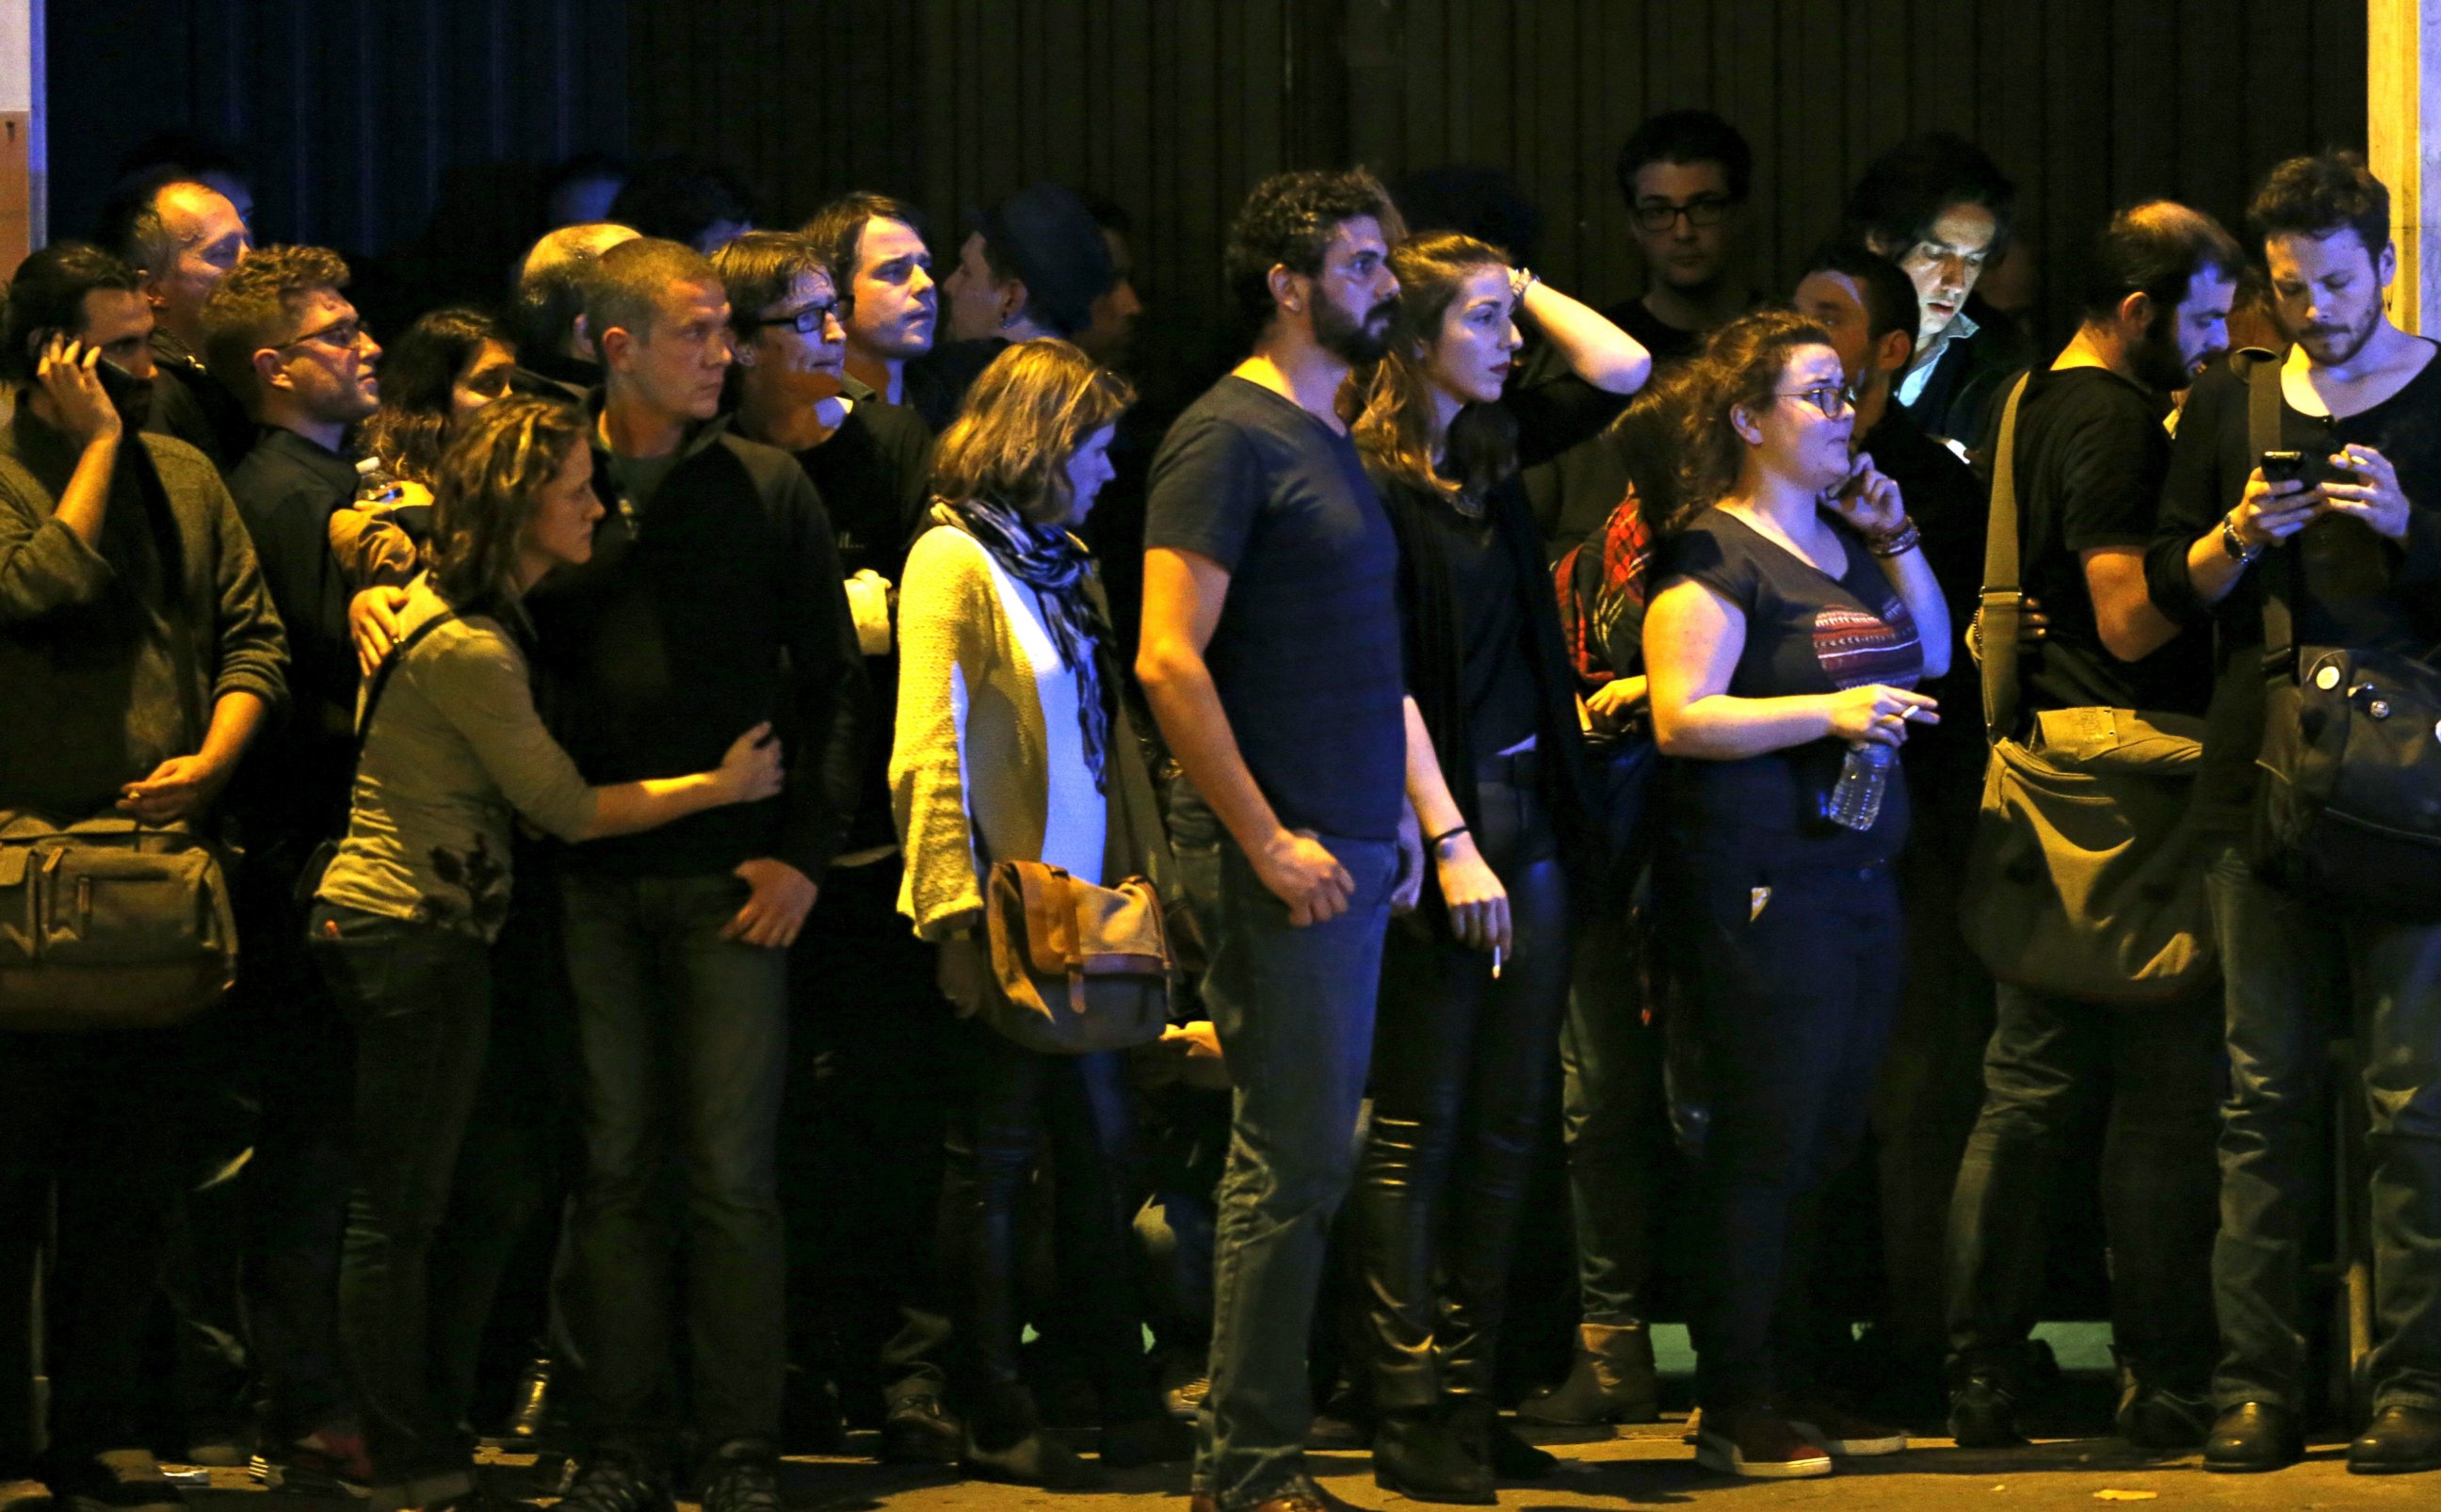 PHOTO: People react as they gather to watch the scene near the Bataclan concert hall following fatal shootings in Paris, France, Nov. 13, 2015.